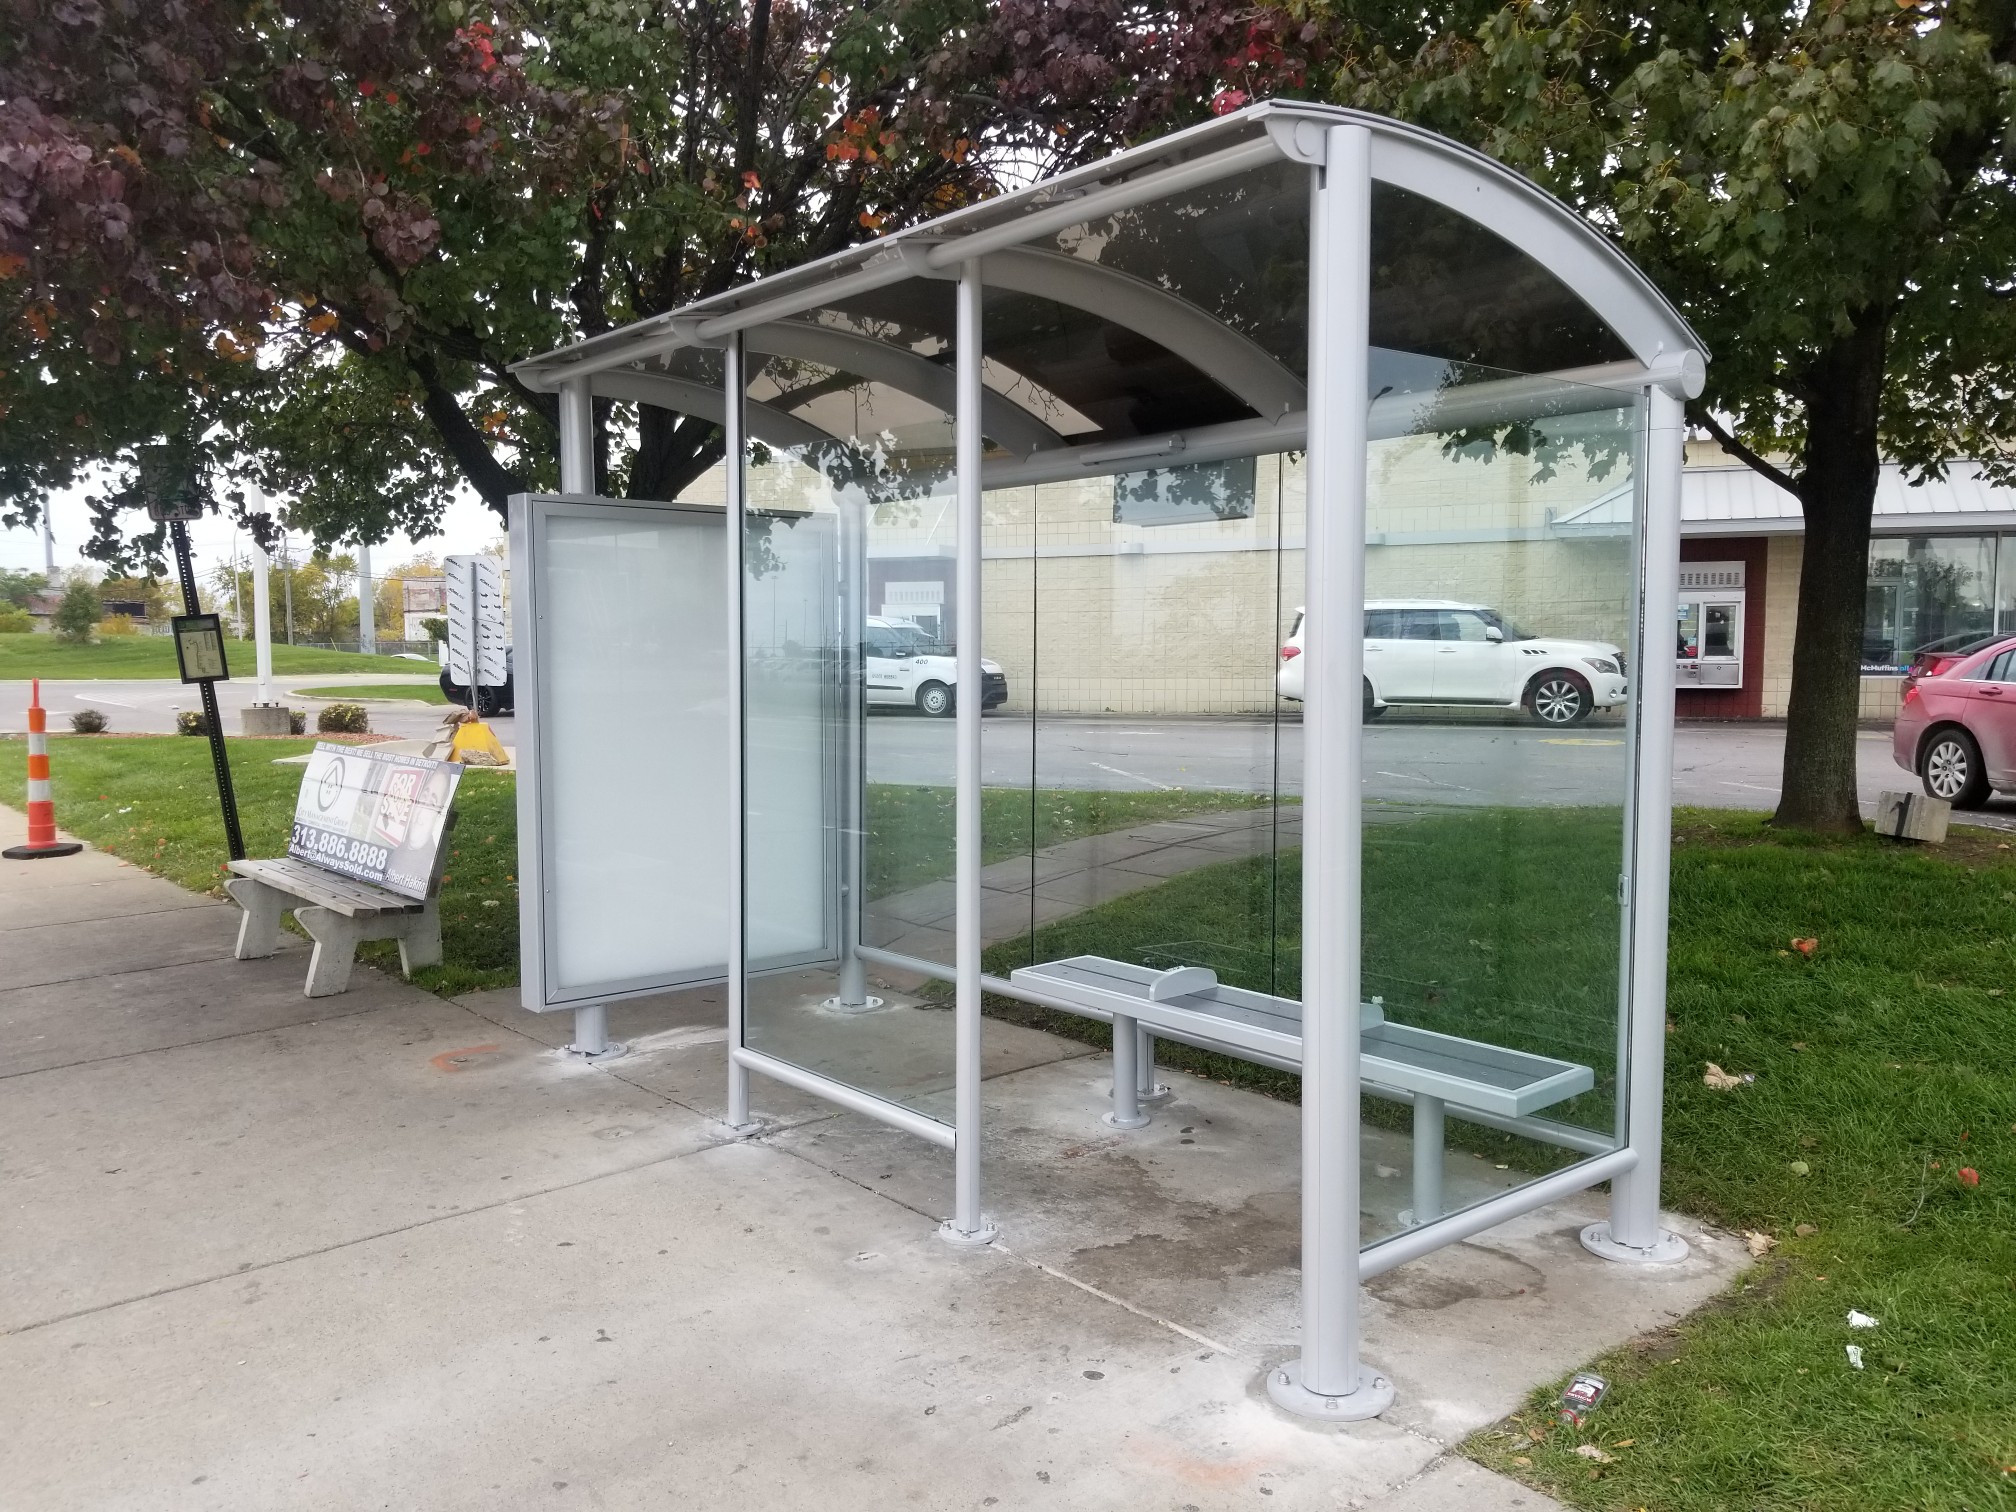 A metal bus shelter with a narrow bench and curved roof. There’s a solar panel on top.